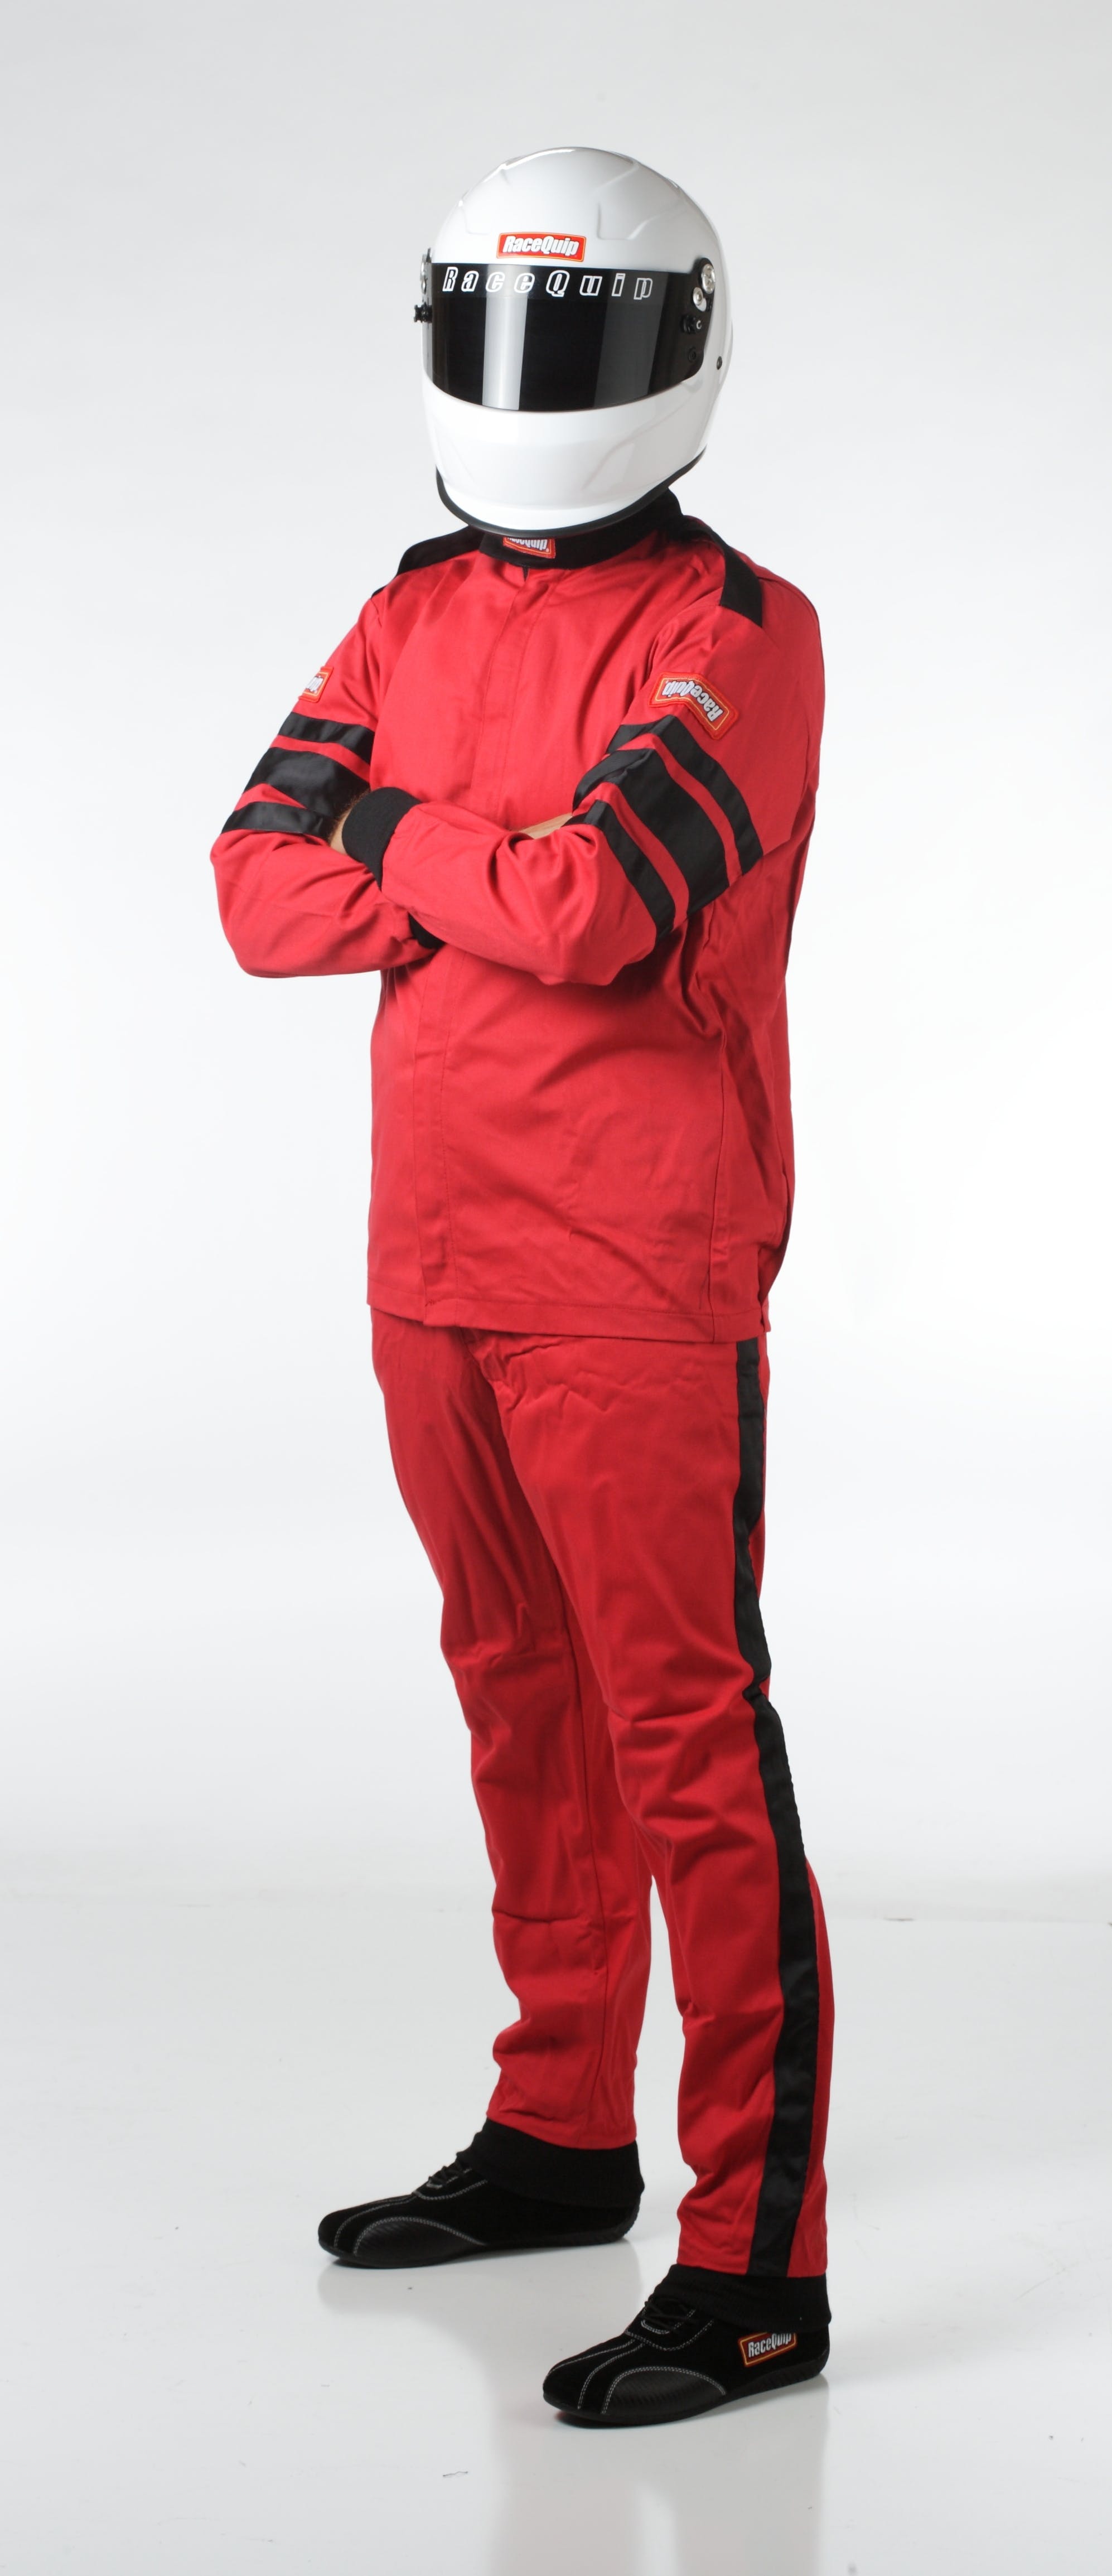 RaceQuip 111018 SFI-1 Pyrovatex Single-Layer Racing Fire Jacket (Red, 3X-Large)